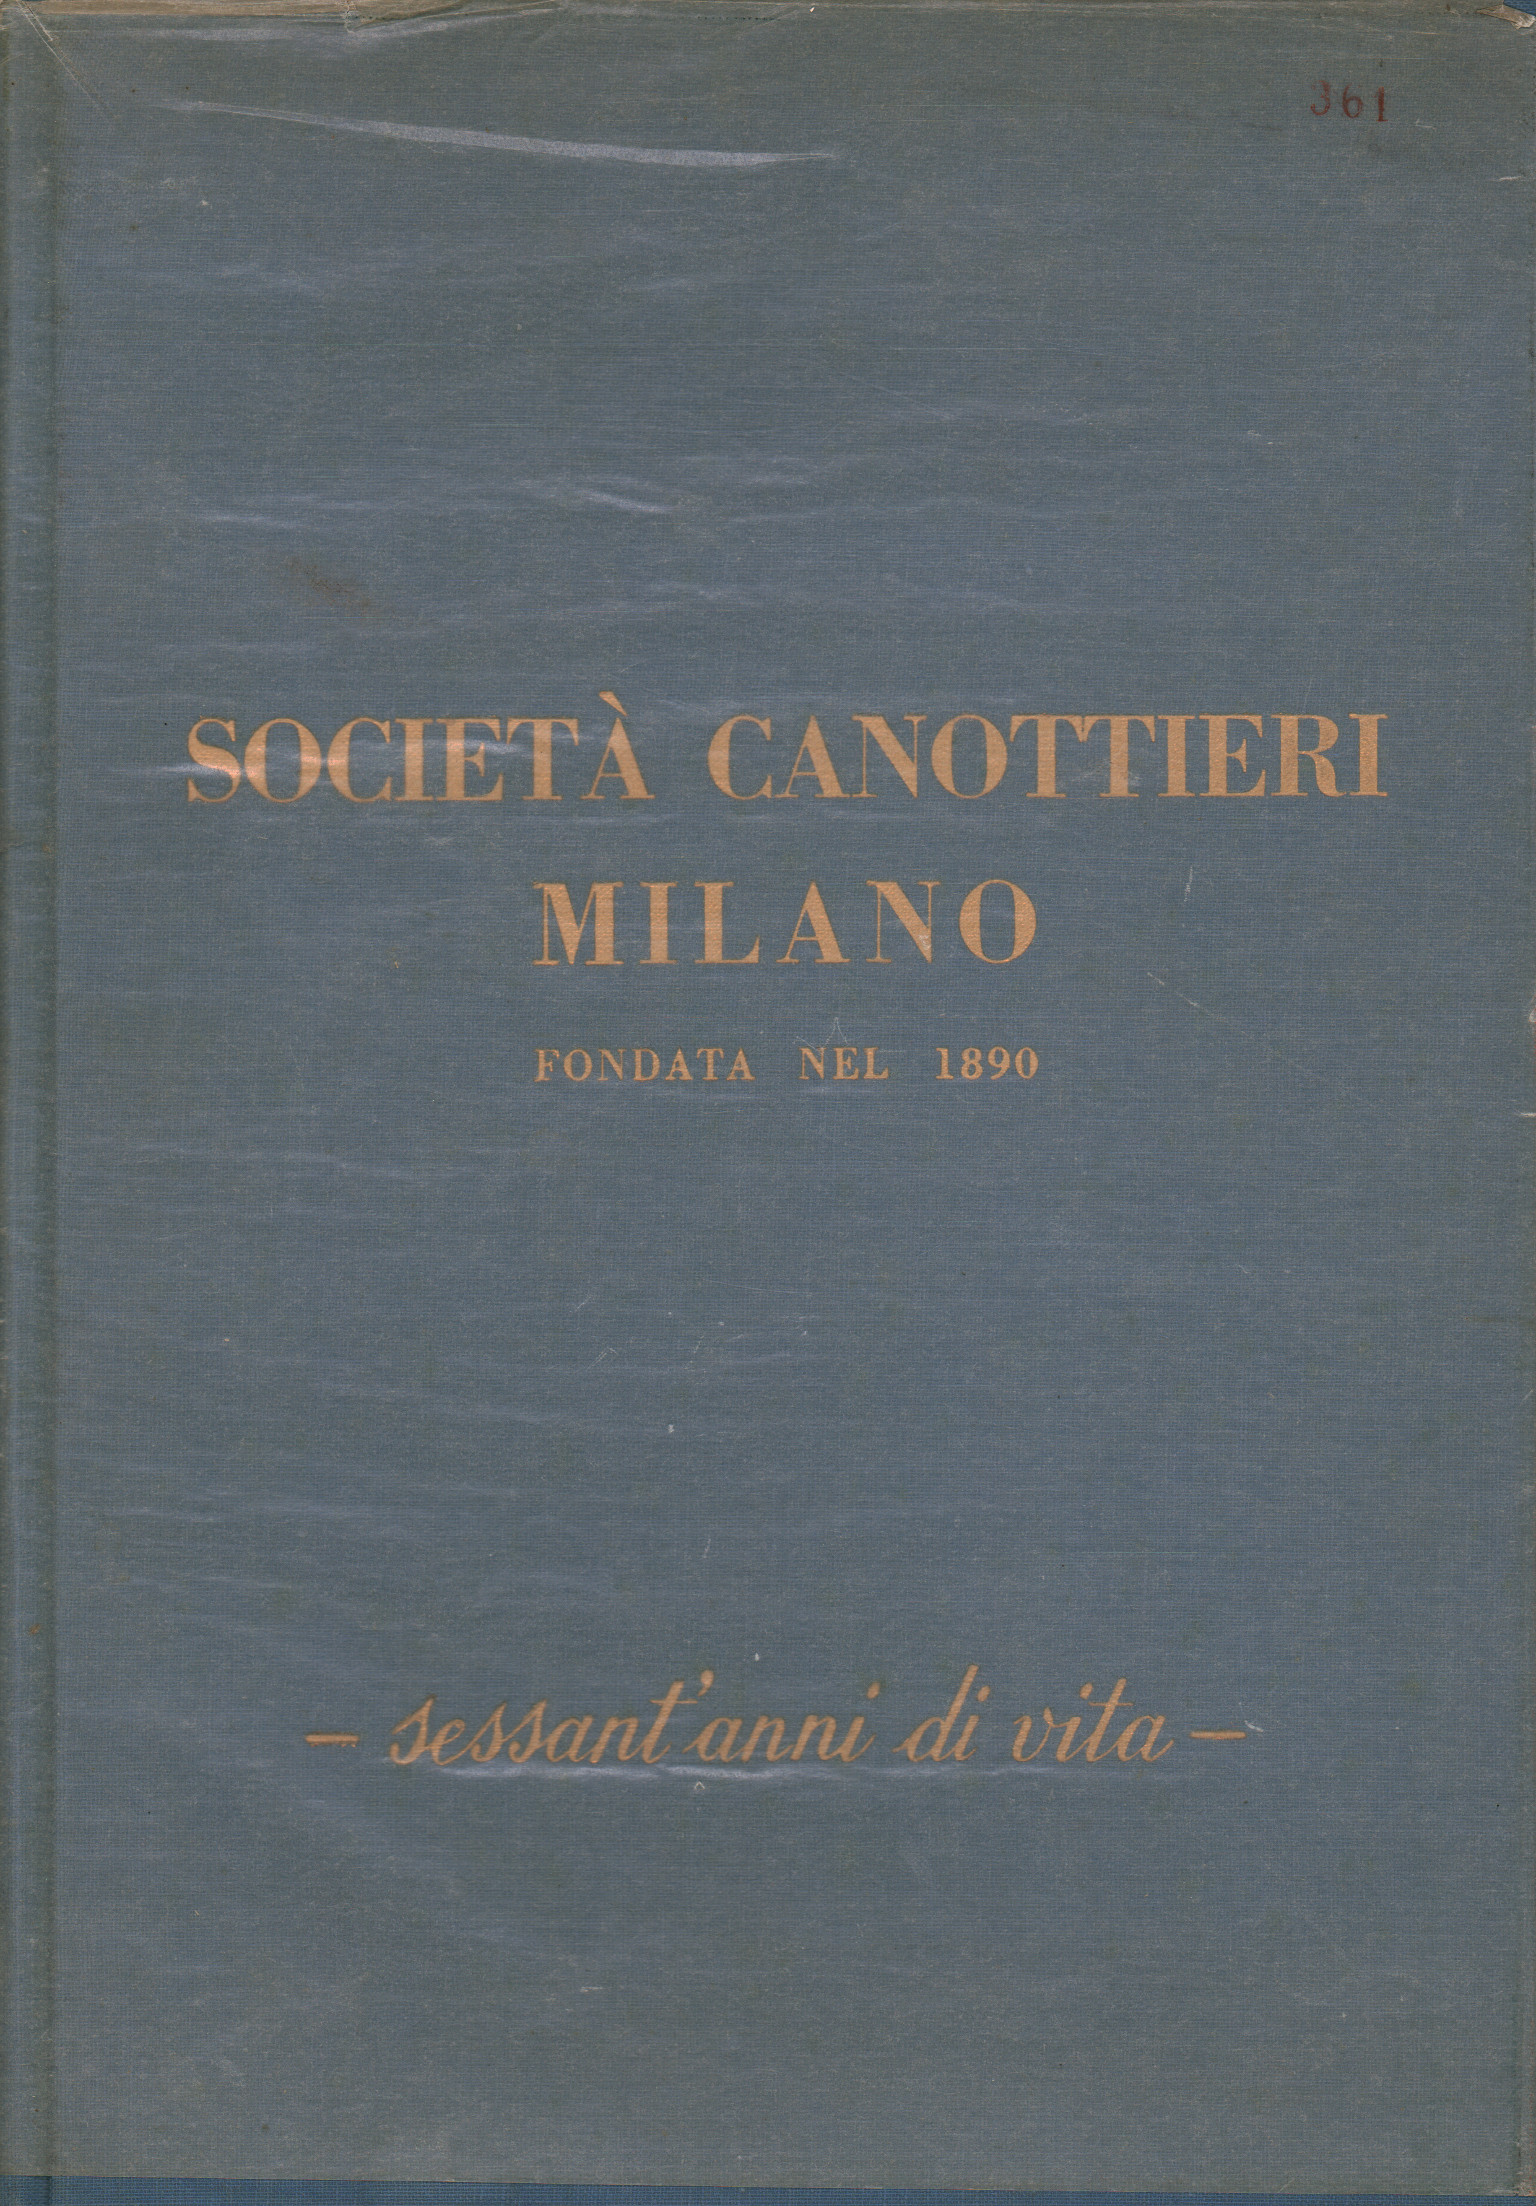 Milan rowing company founded in 1890, AA.VV